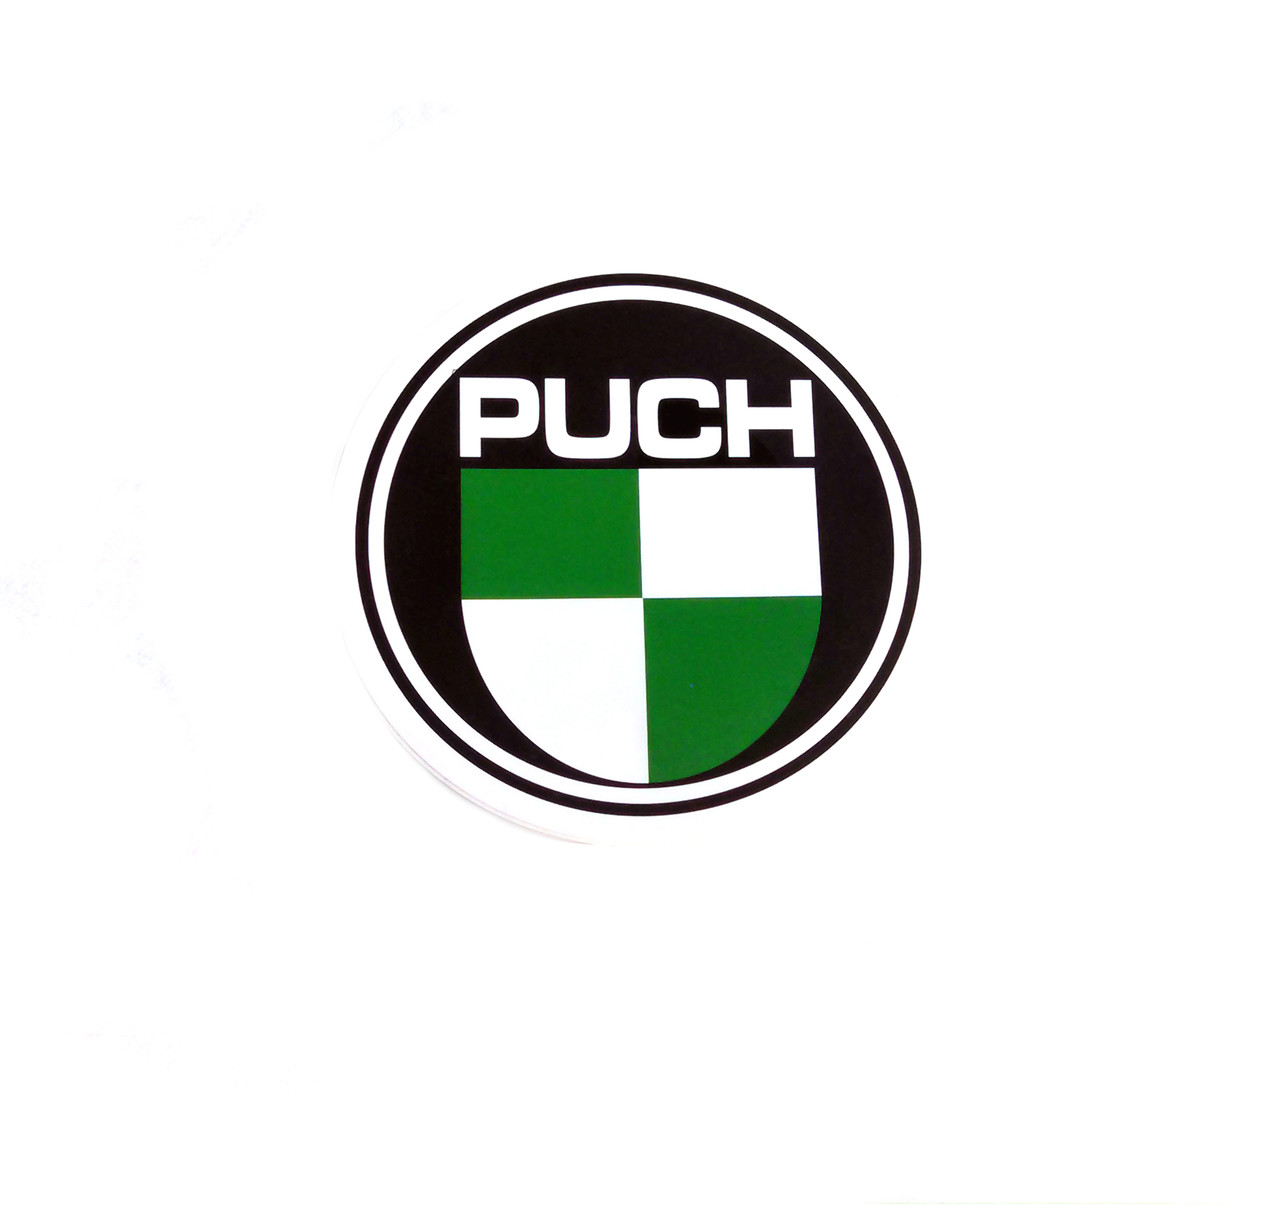 puch moped logo